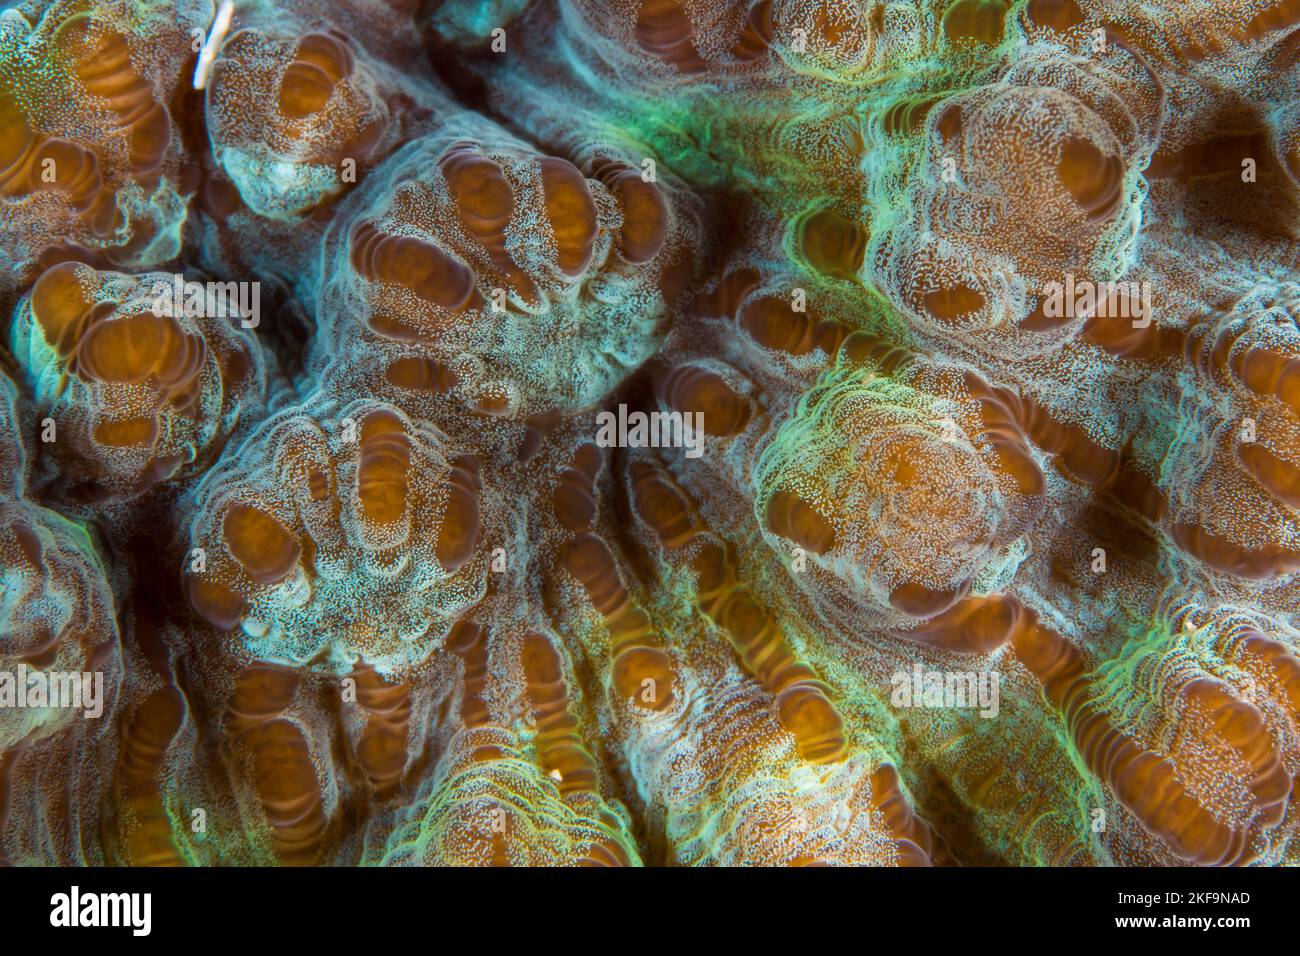 Close up detailed colorful view of healthy coral polyps Stock Photo